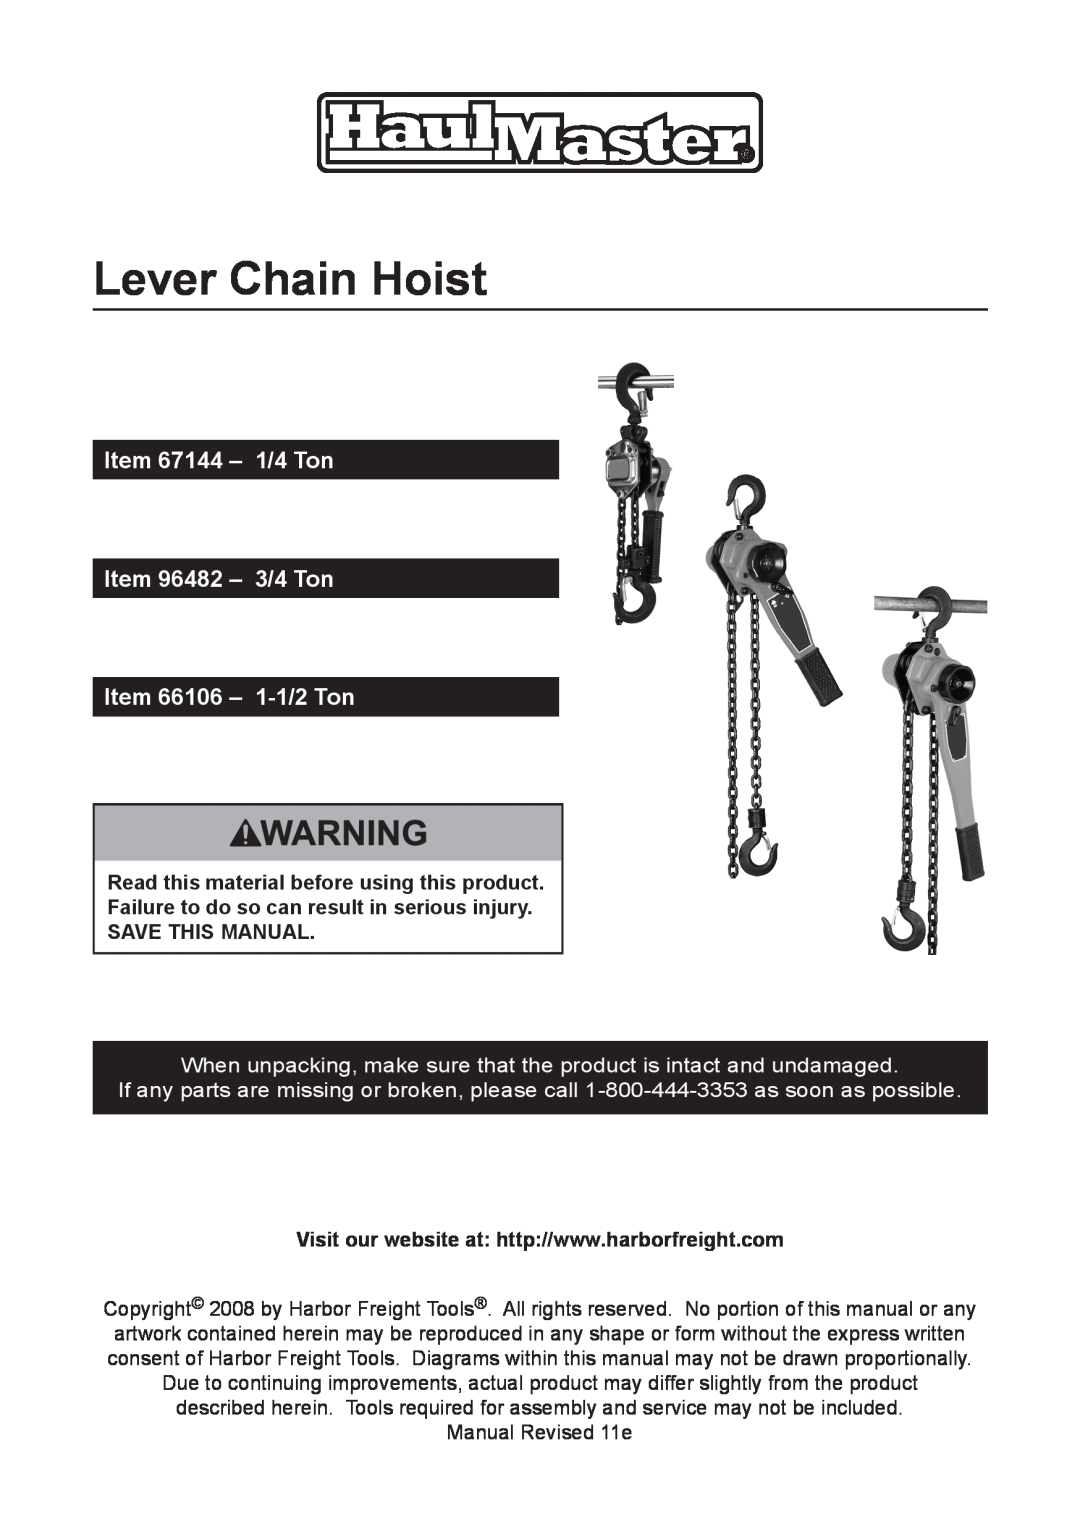 Harbor Freight Tools 66106, 67144, 69482 manual Read this material before using this product, Lever Chain Hoist 